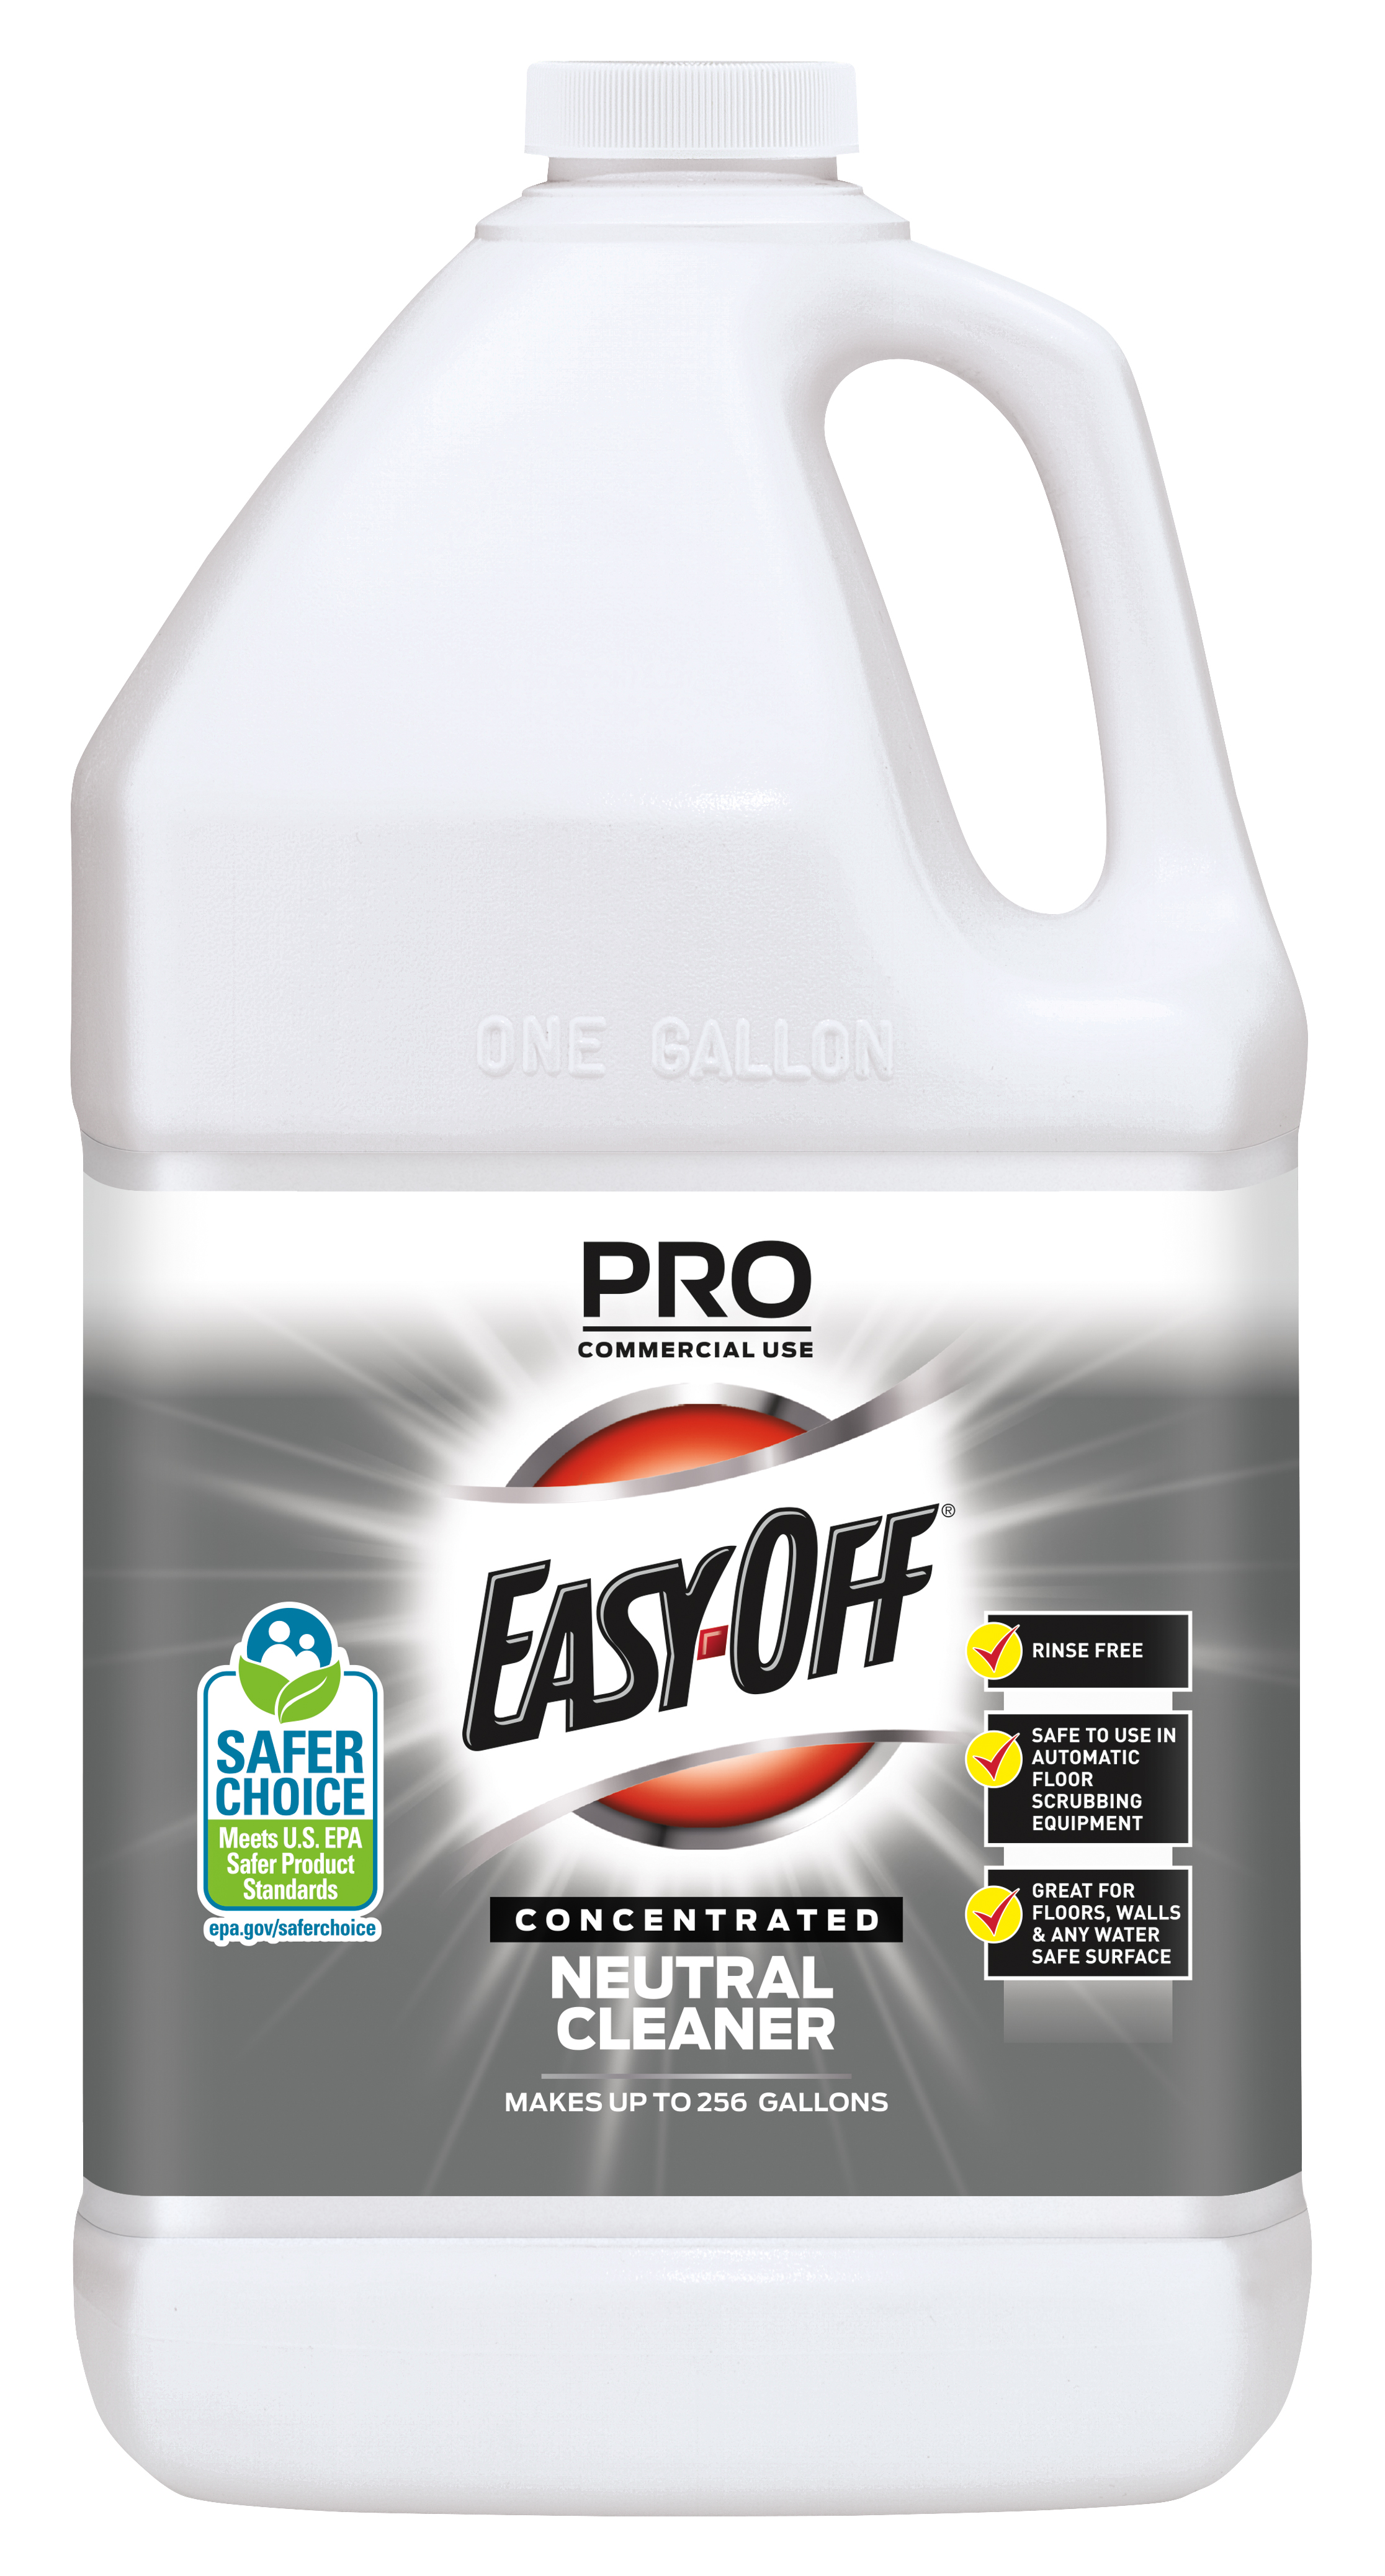 Professional EASYOFF Concentrated Neutral Cleaner